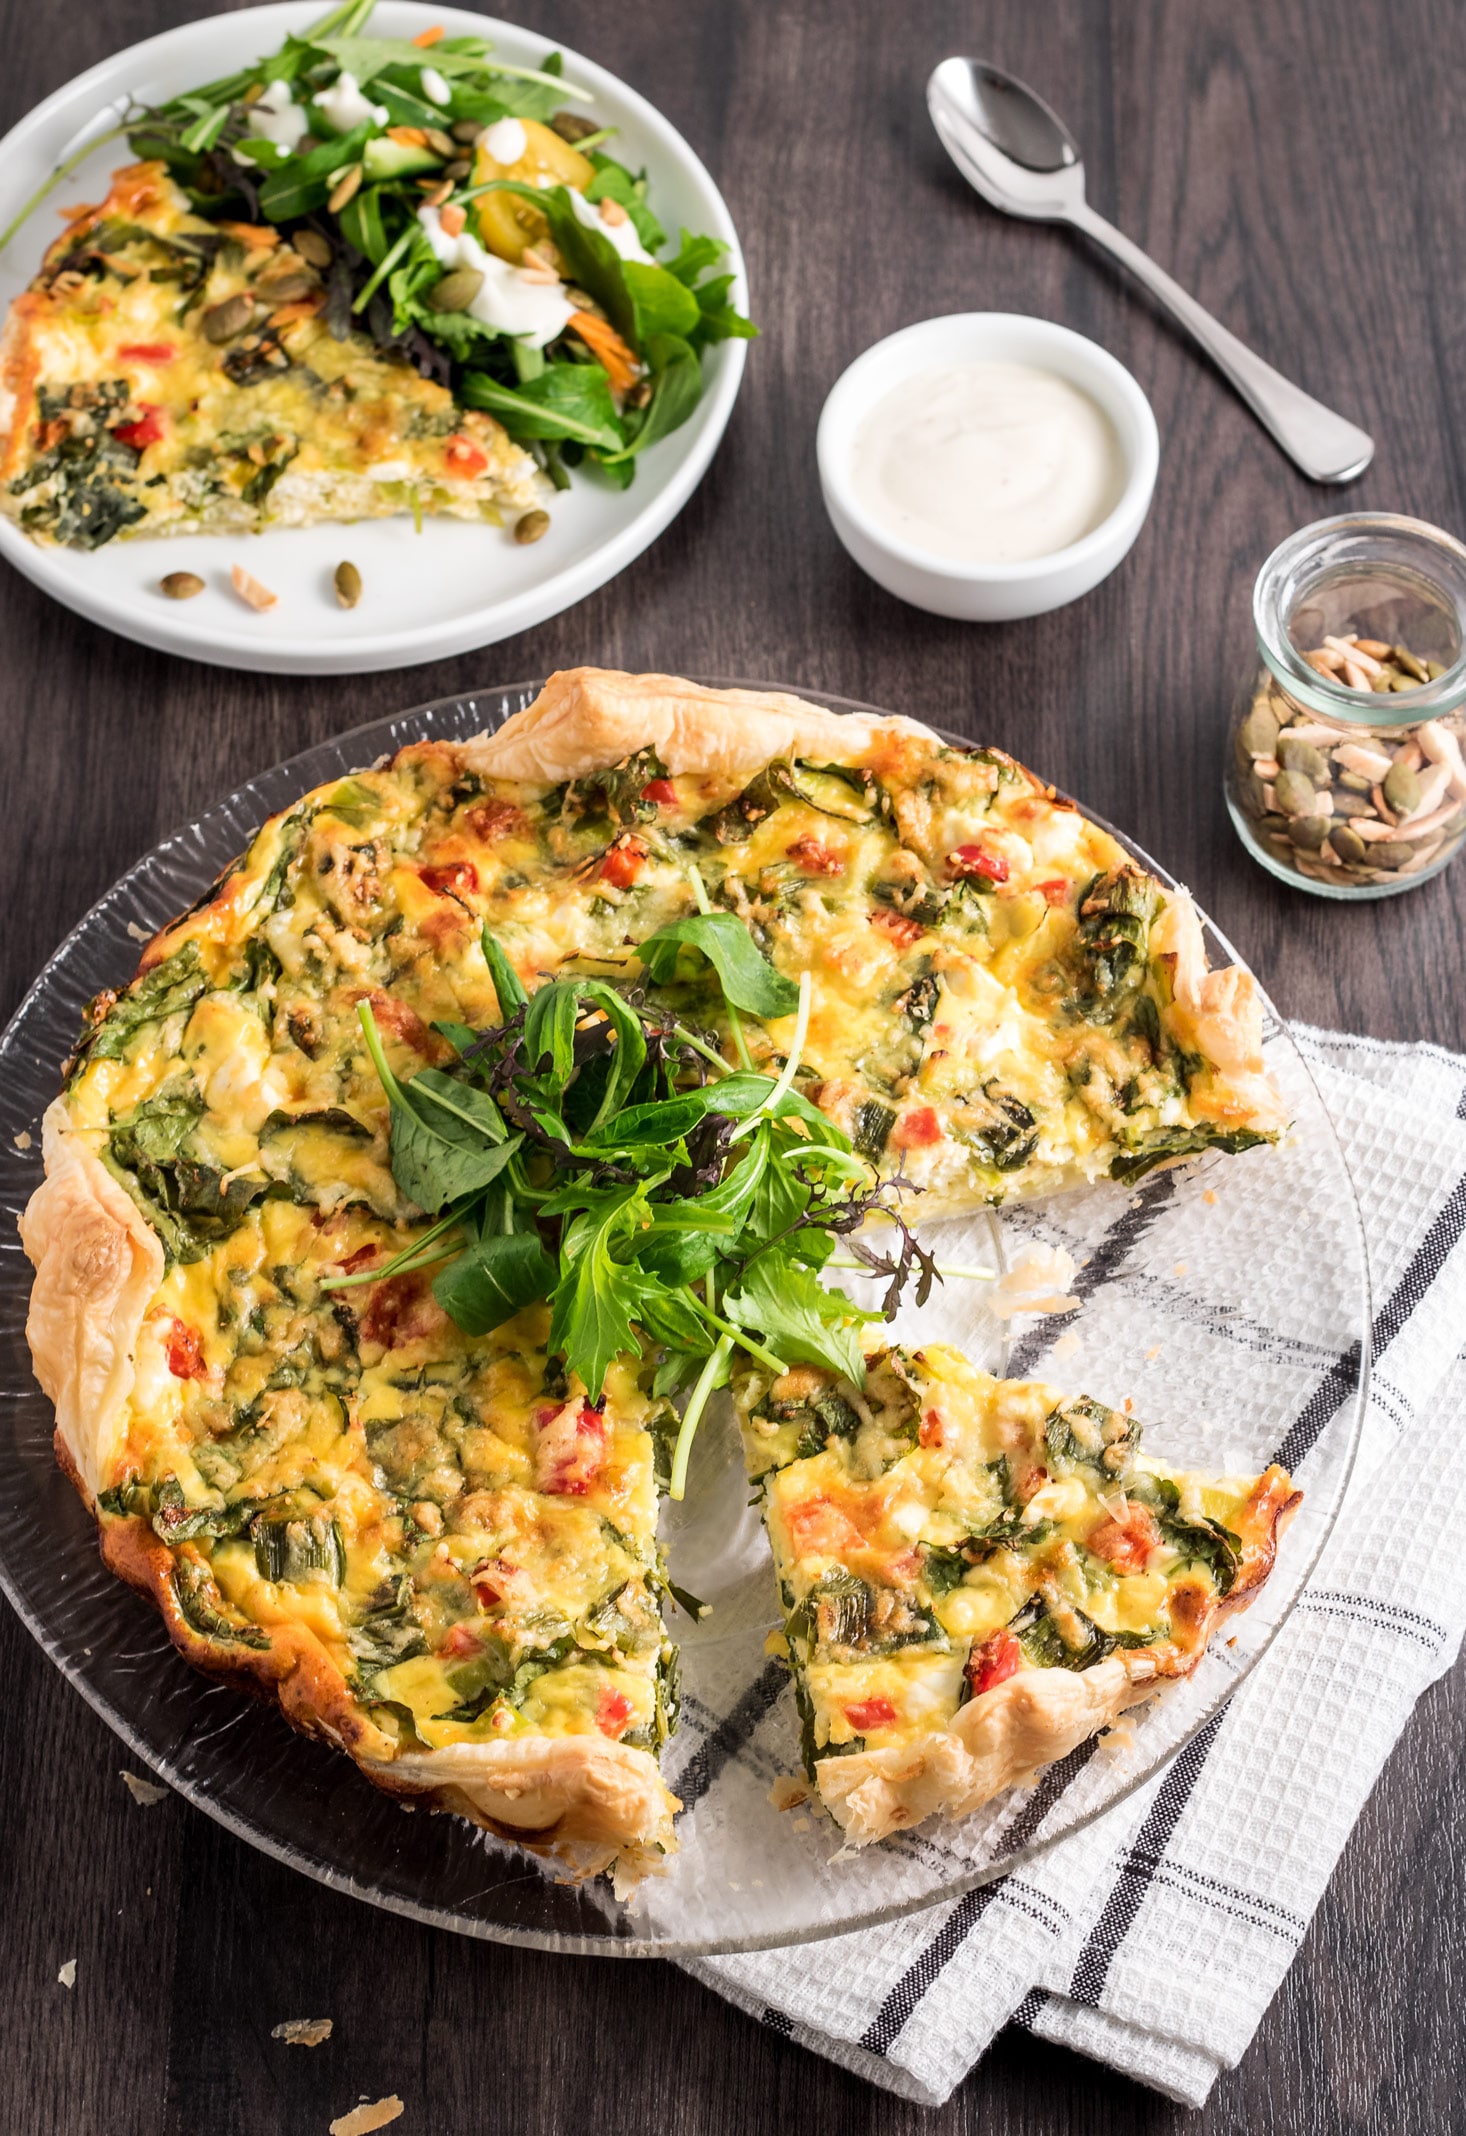 Soft leeks and salty feta cheese are a match made in heaven in this moreish leek and feta quiche.